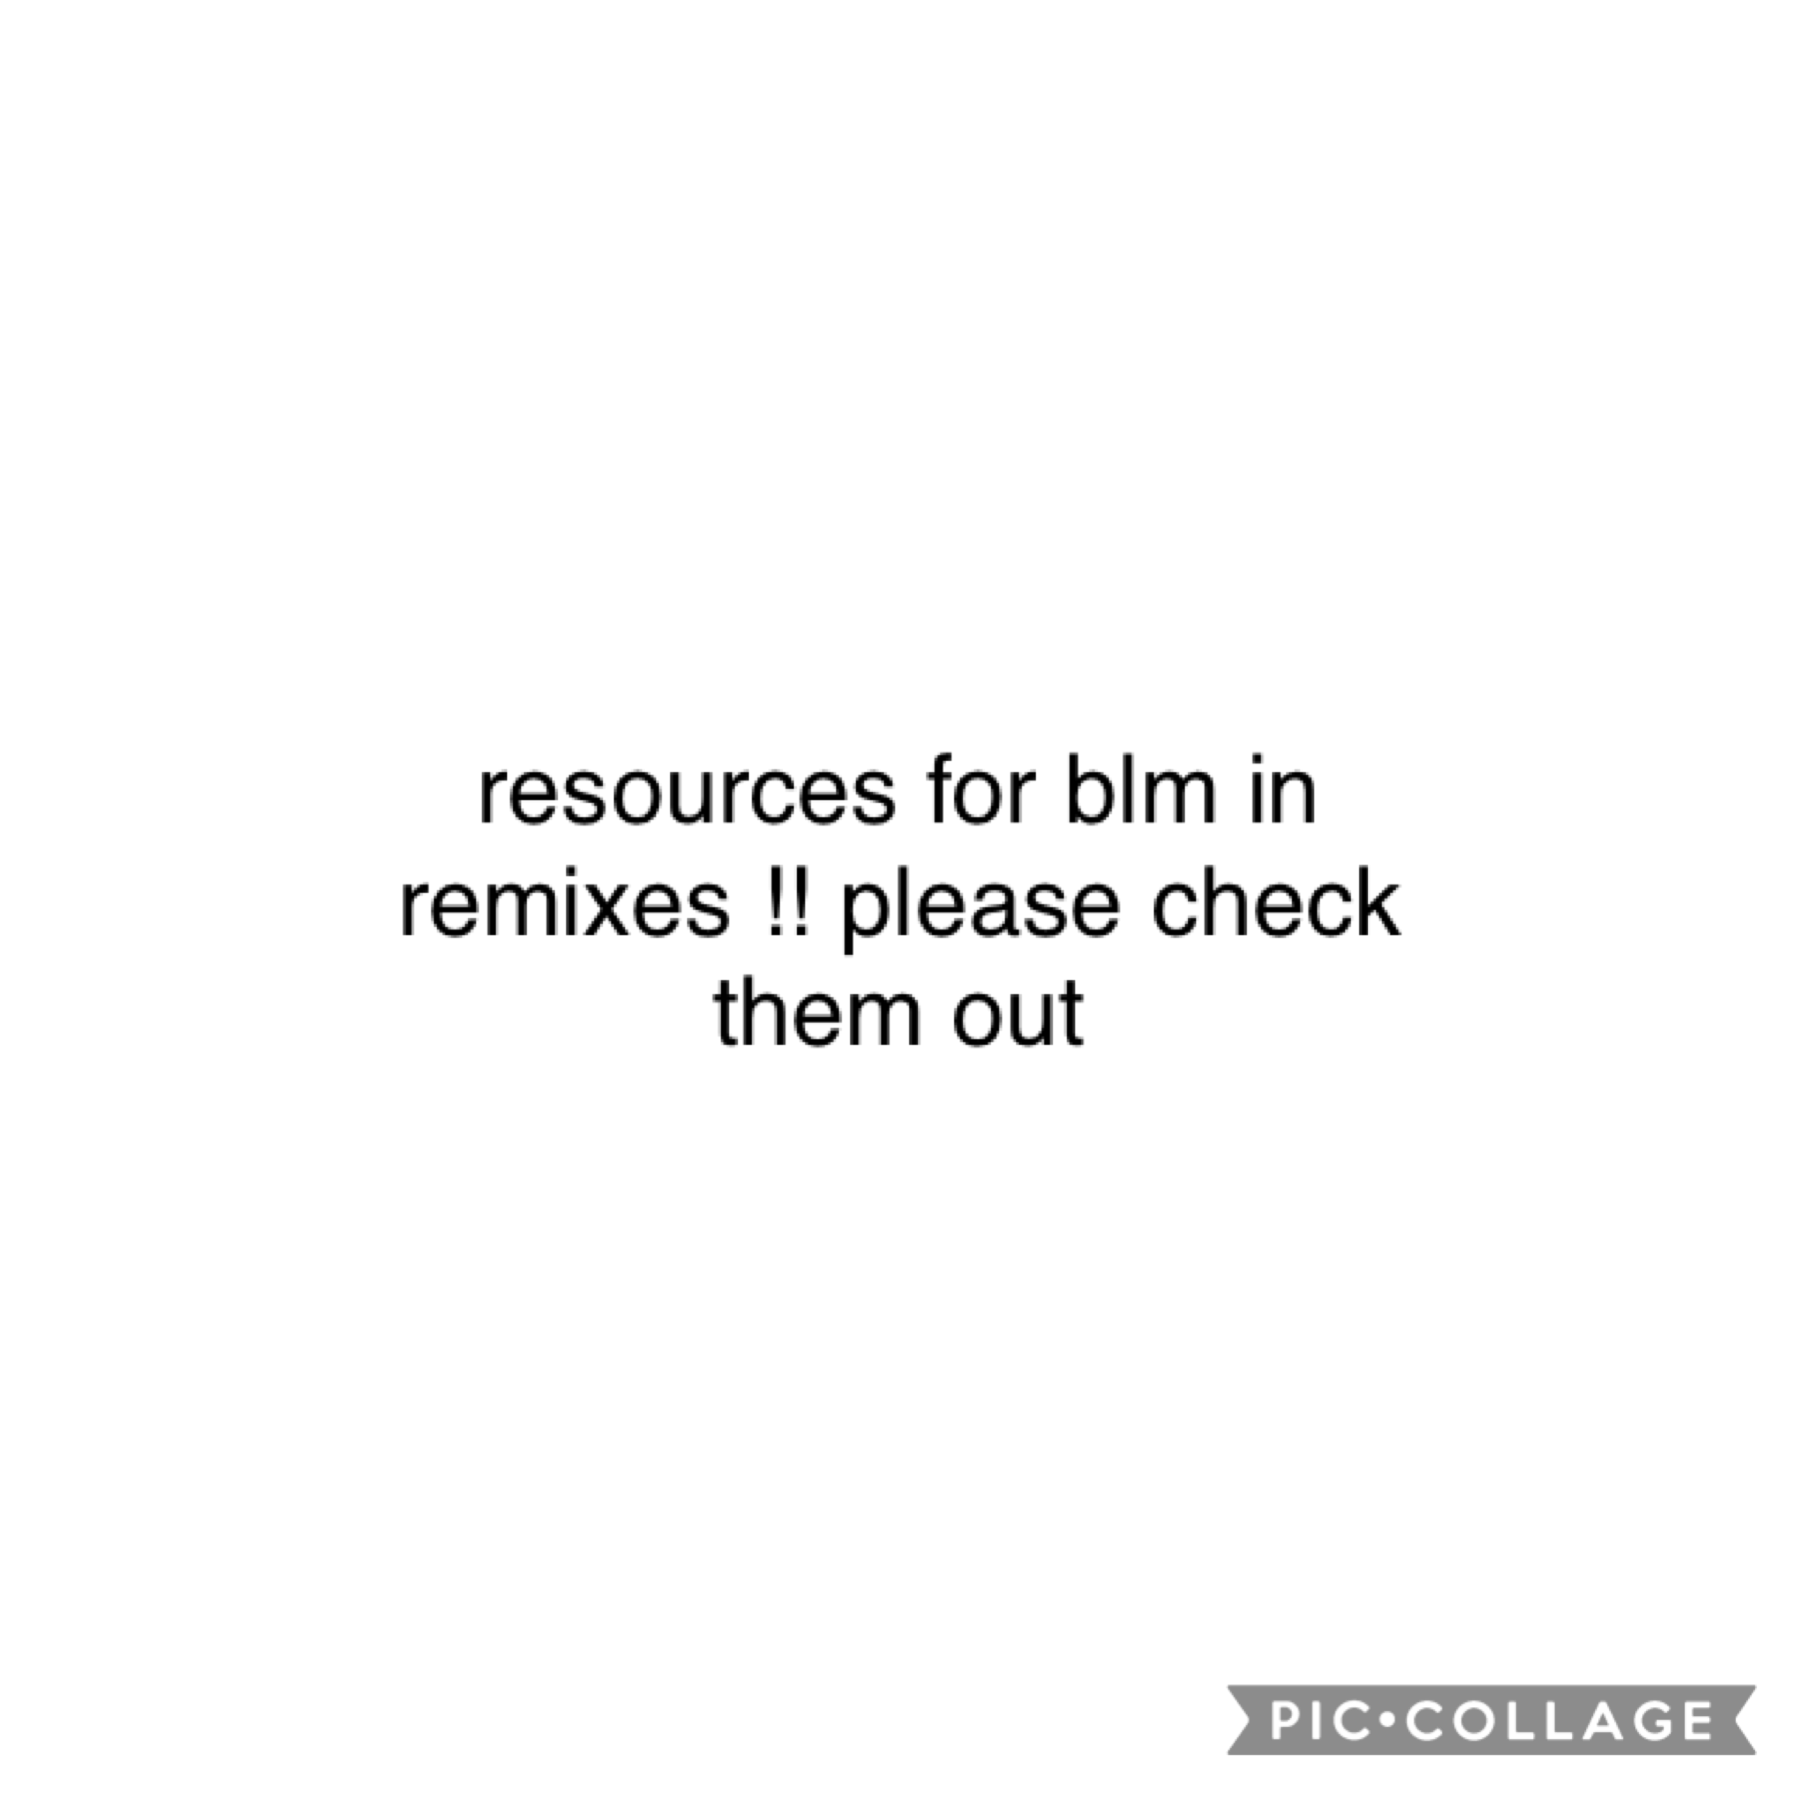 I figured that it would be easiest to move all of the resources that I’ve already posted + more in the remixes of this post. I’ll also be updating it whenever I find something new to add so keep checking up on this post if you want. BLM 💗